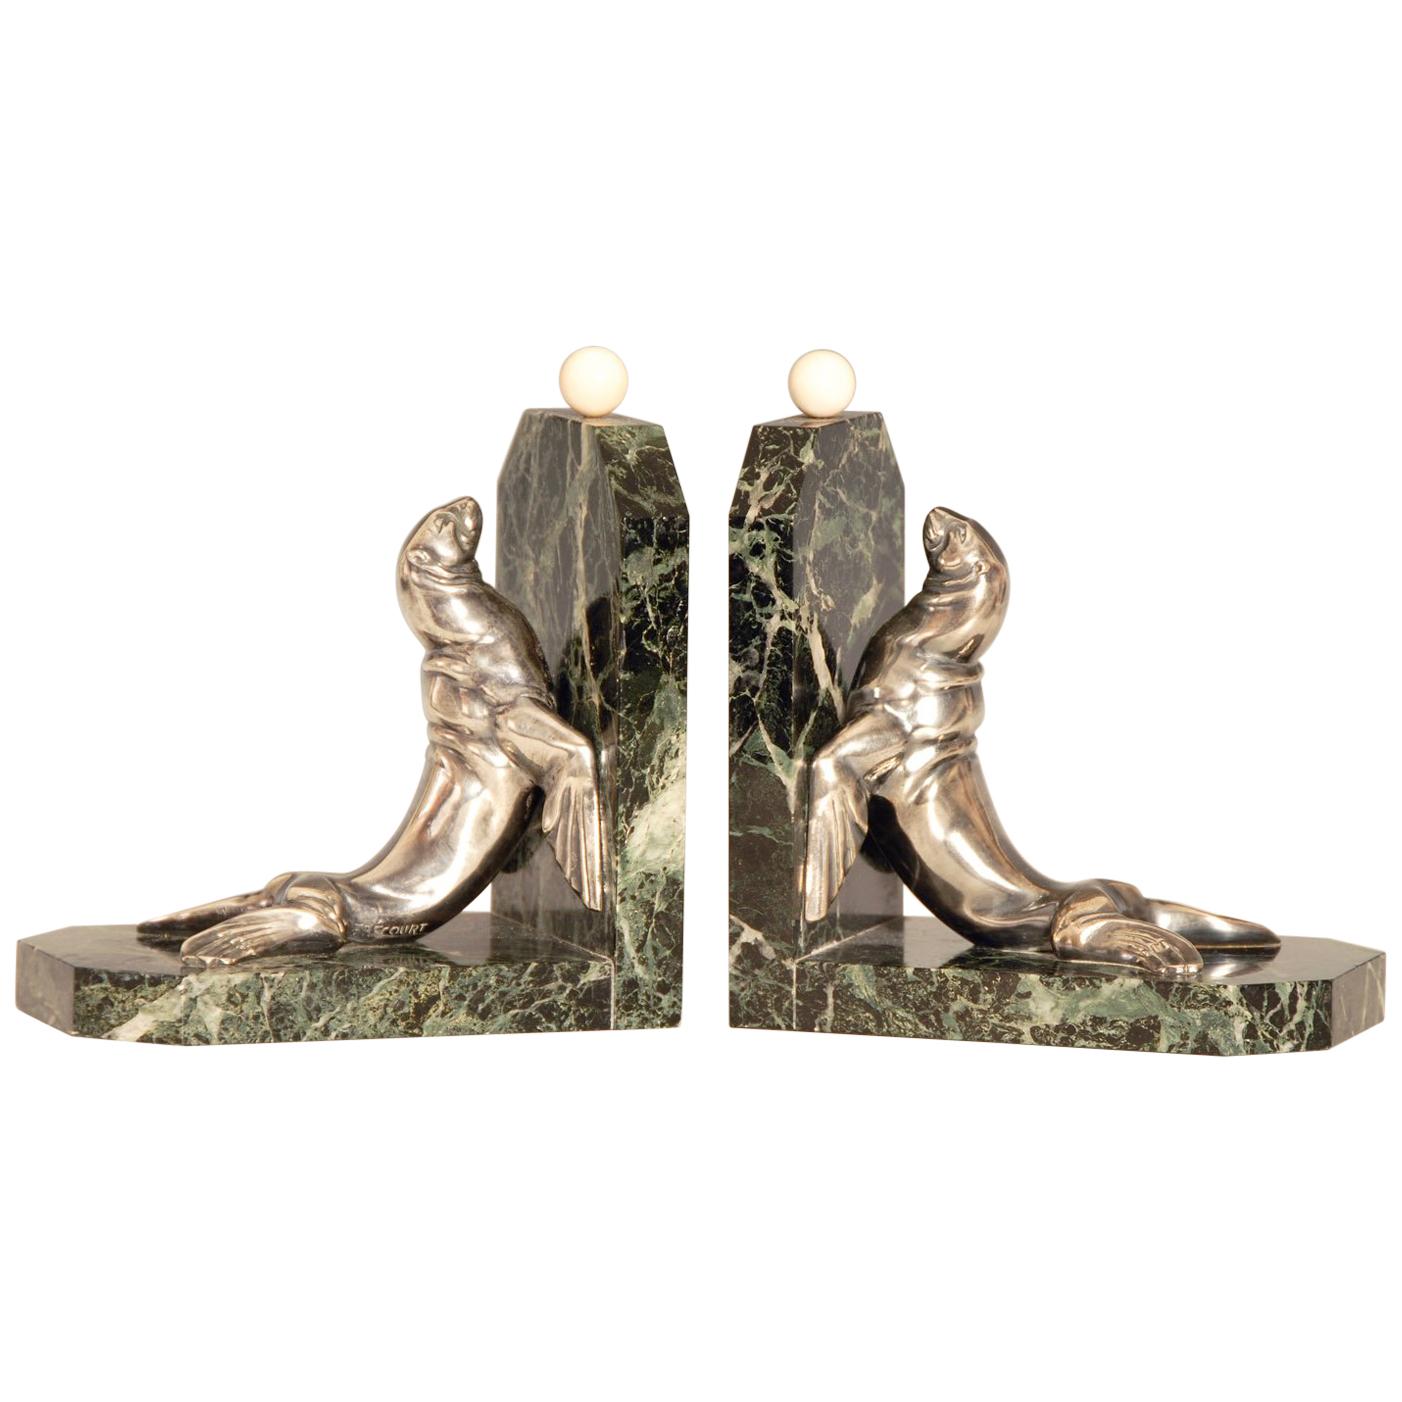 Art Deco Silvered Bronze Sea Lions on Marble Base Bookends by Maurice Frecourt For Sale